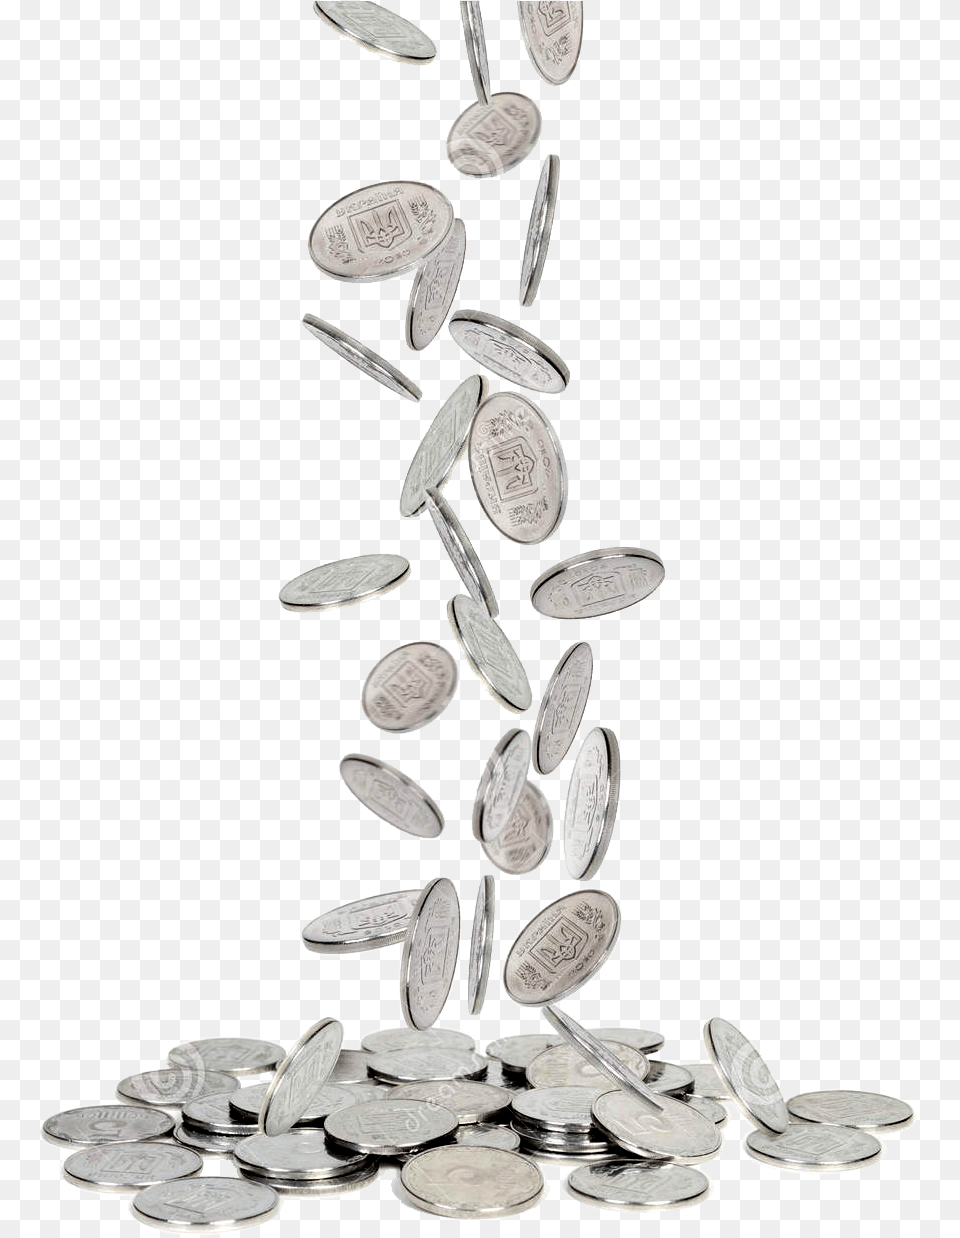 Silver Coins Falling Coins Falling File, Coin, Money Free Transparent Png